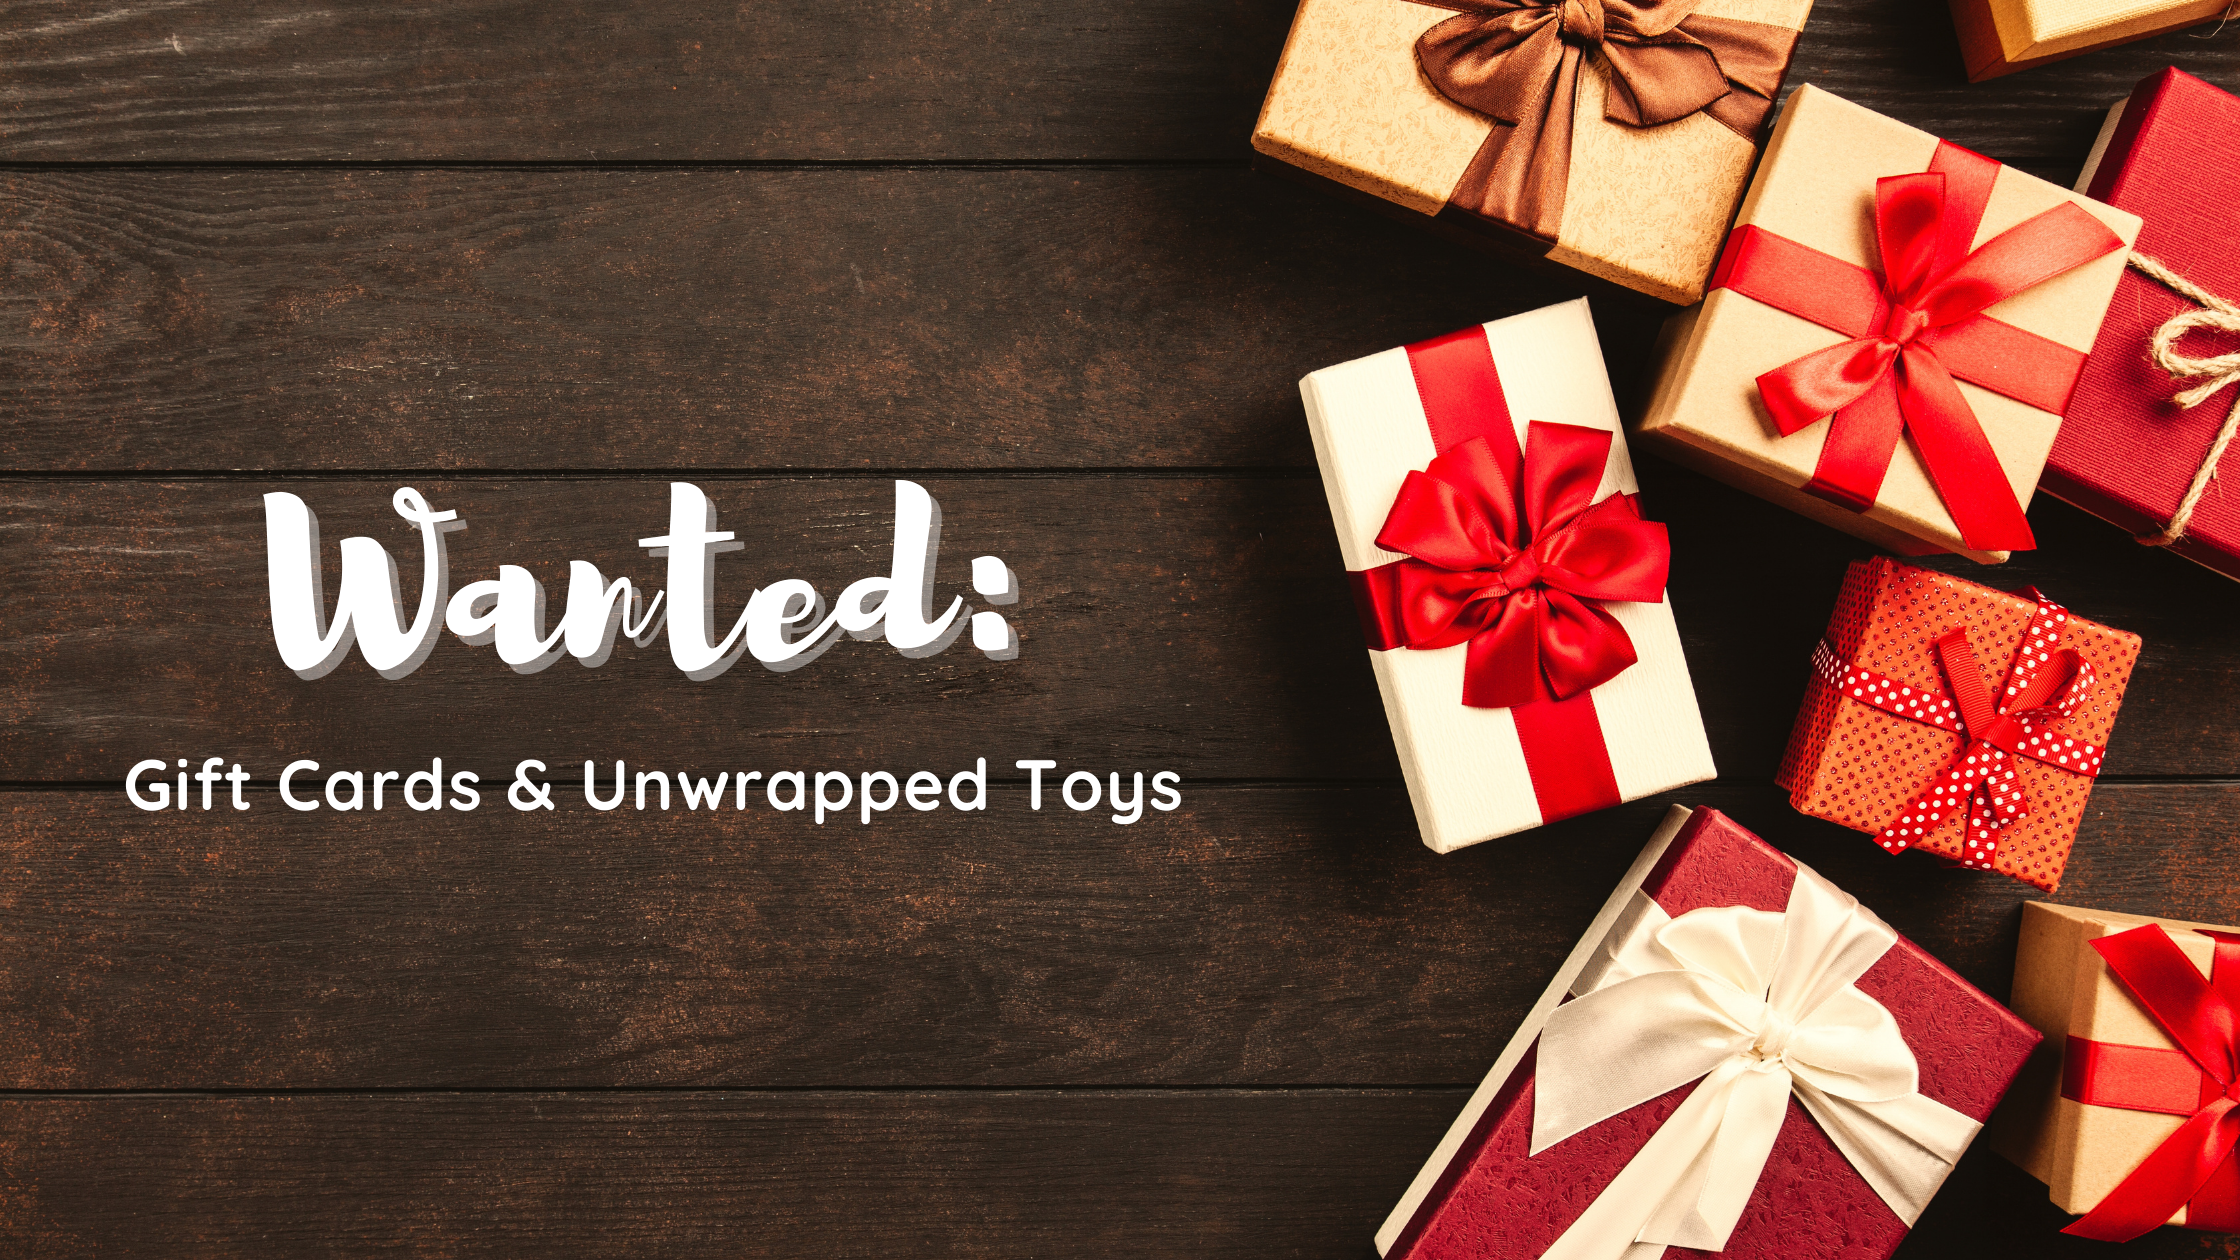 Wanted: Gift Cards & Unwrapped Toys for the Holidays